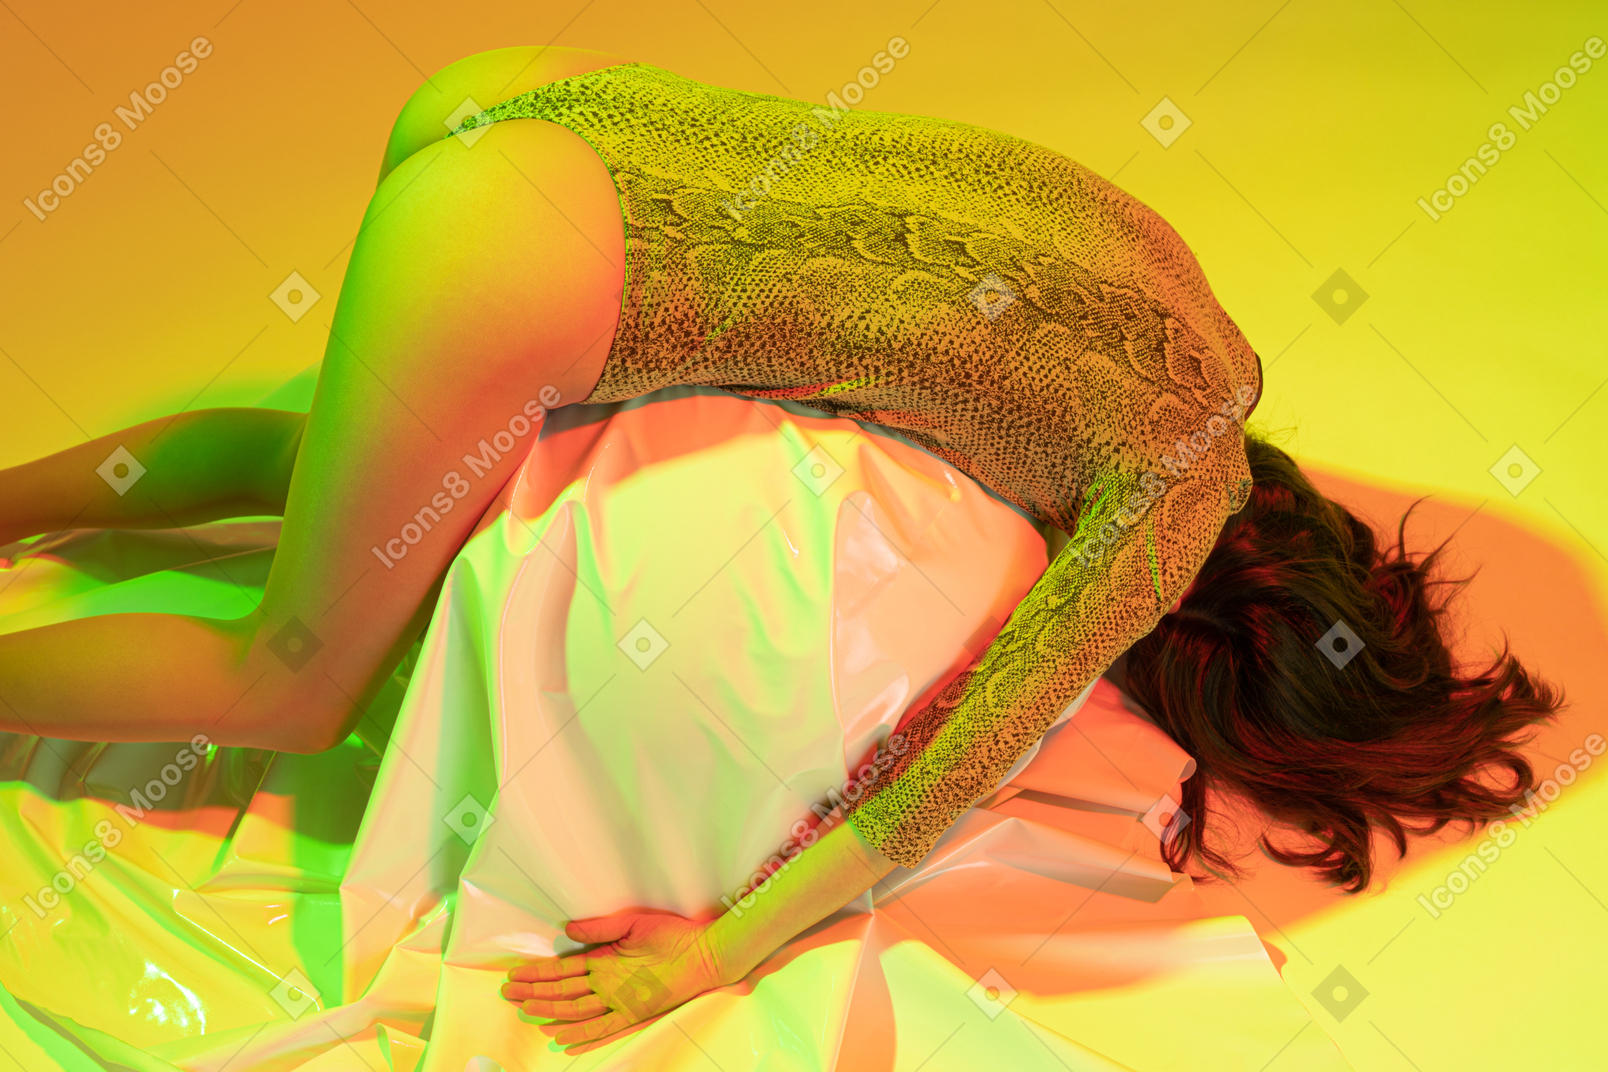 Young woman lying in a sensual pose